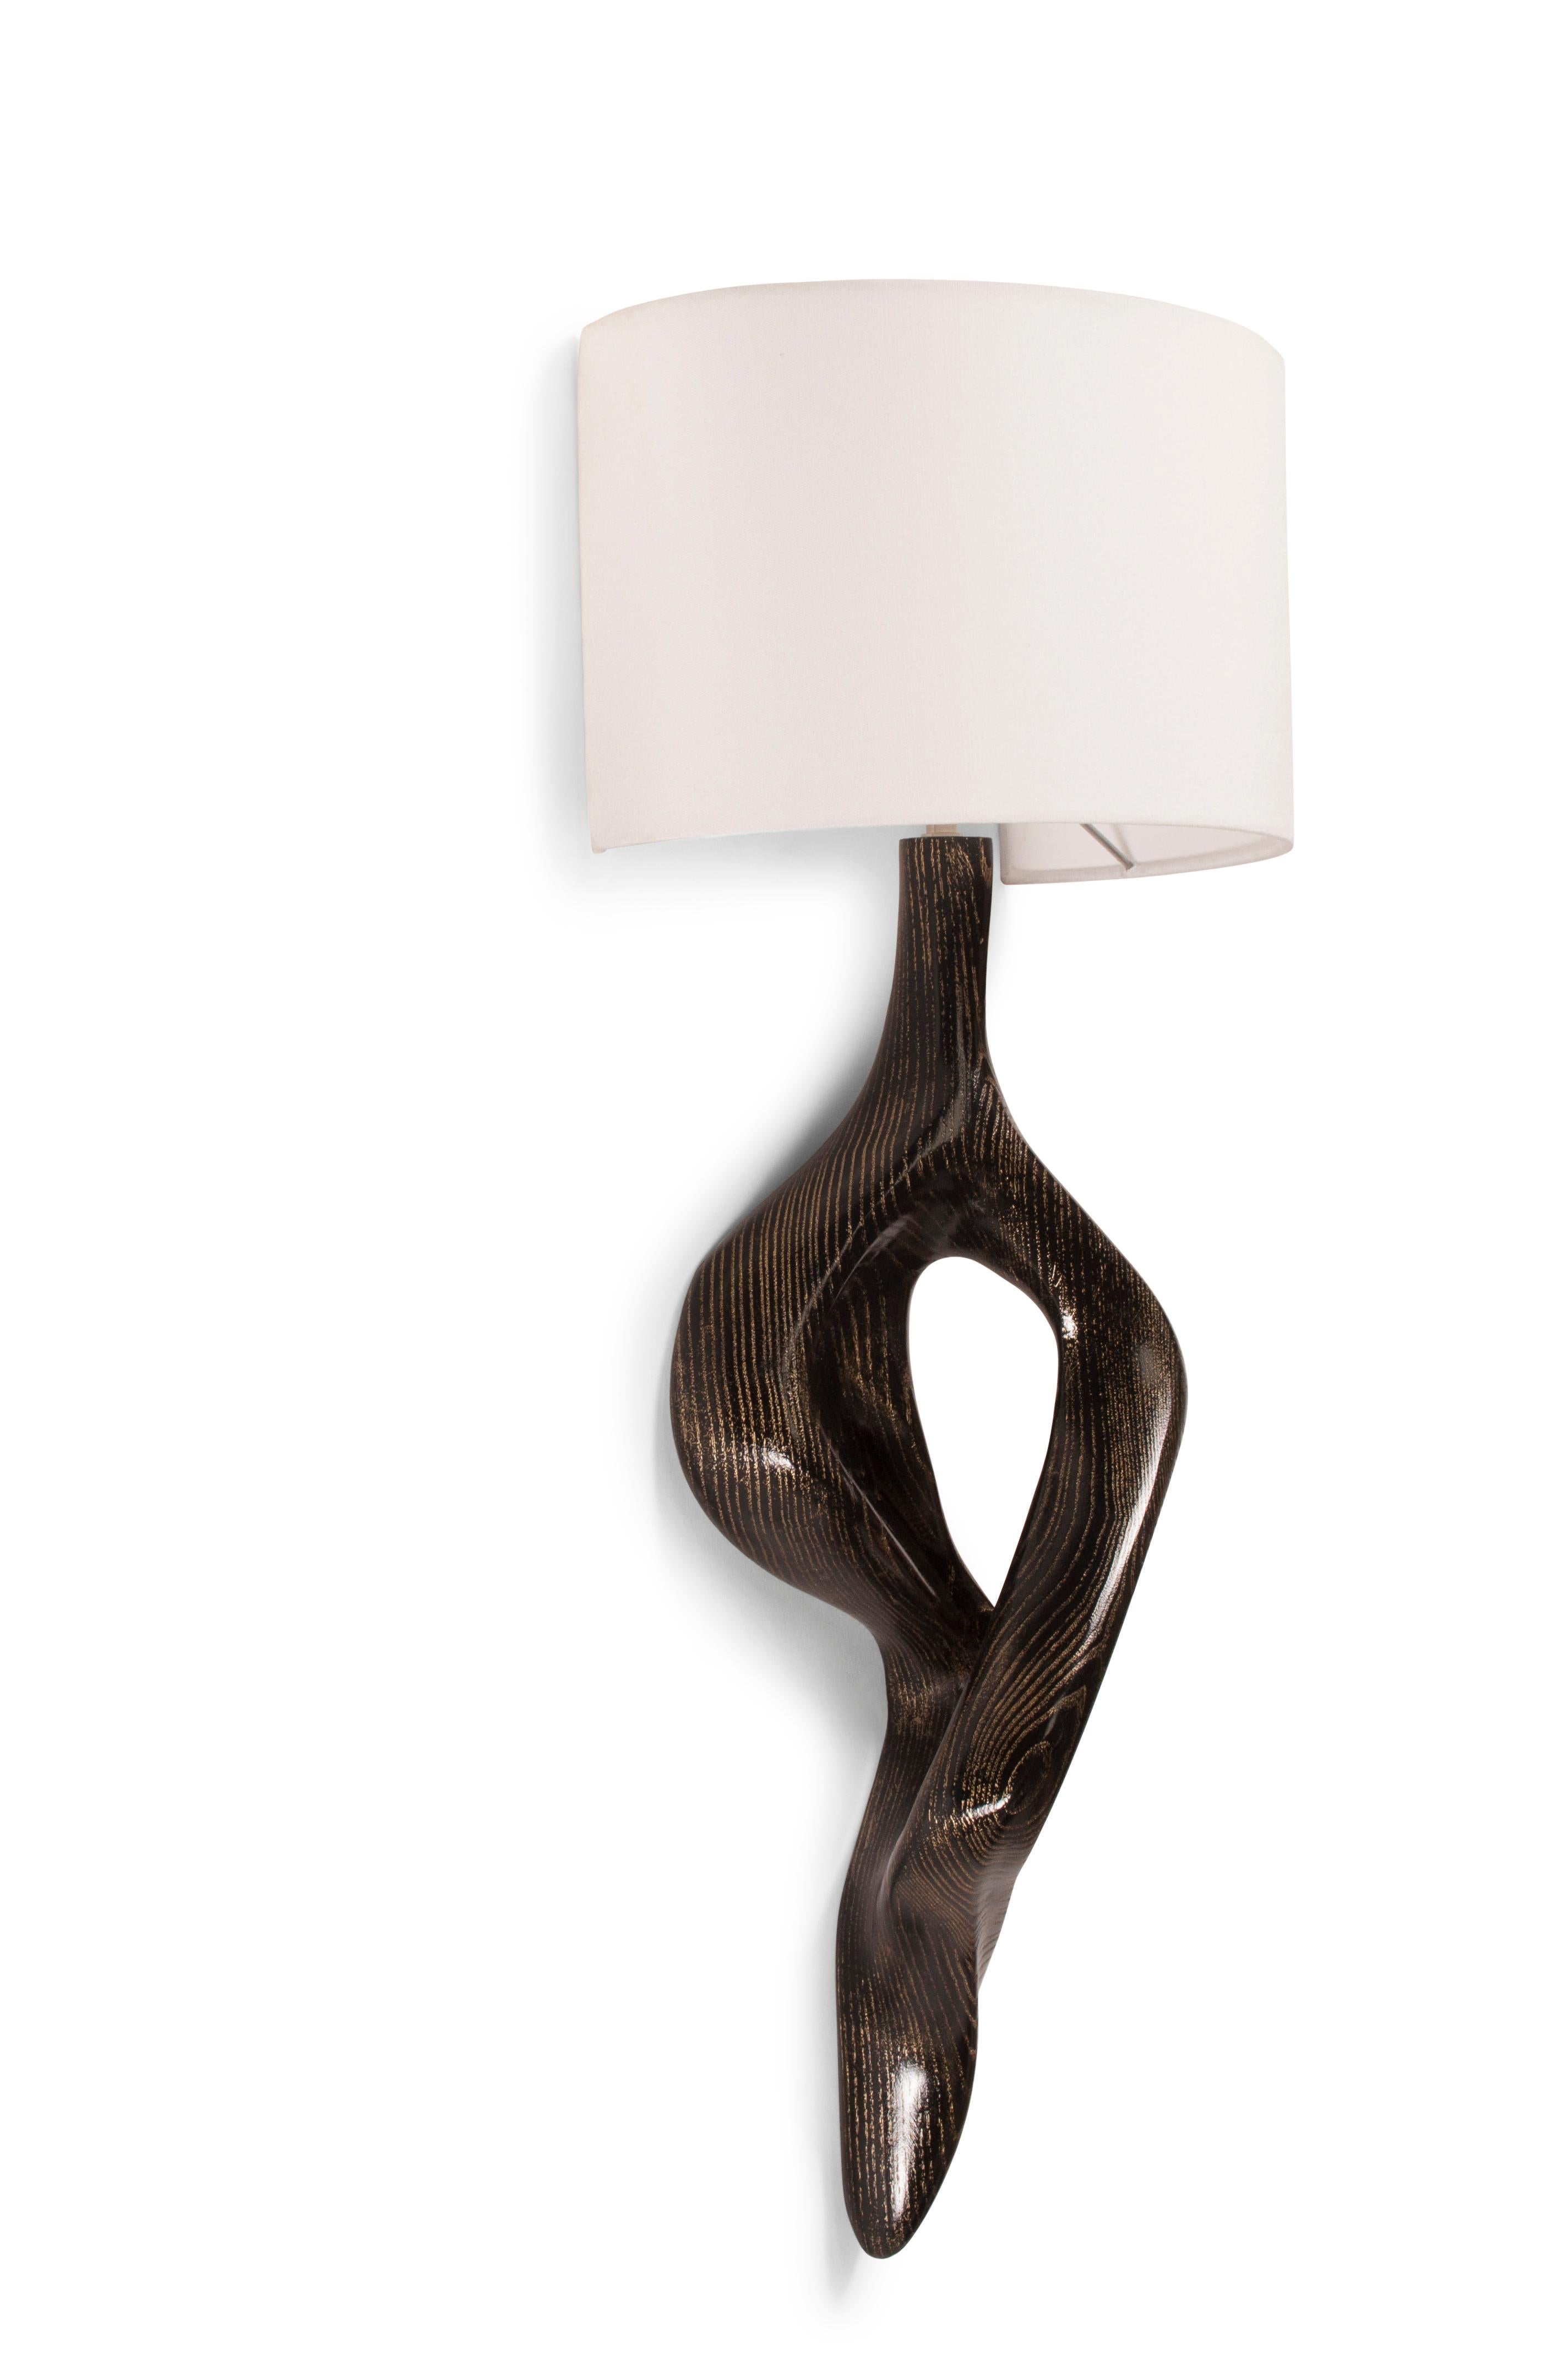 Carved Amorph Nomi Sconces Golden Ebony stain on Ash wood with Ivory Silk Shade For Sale